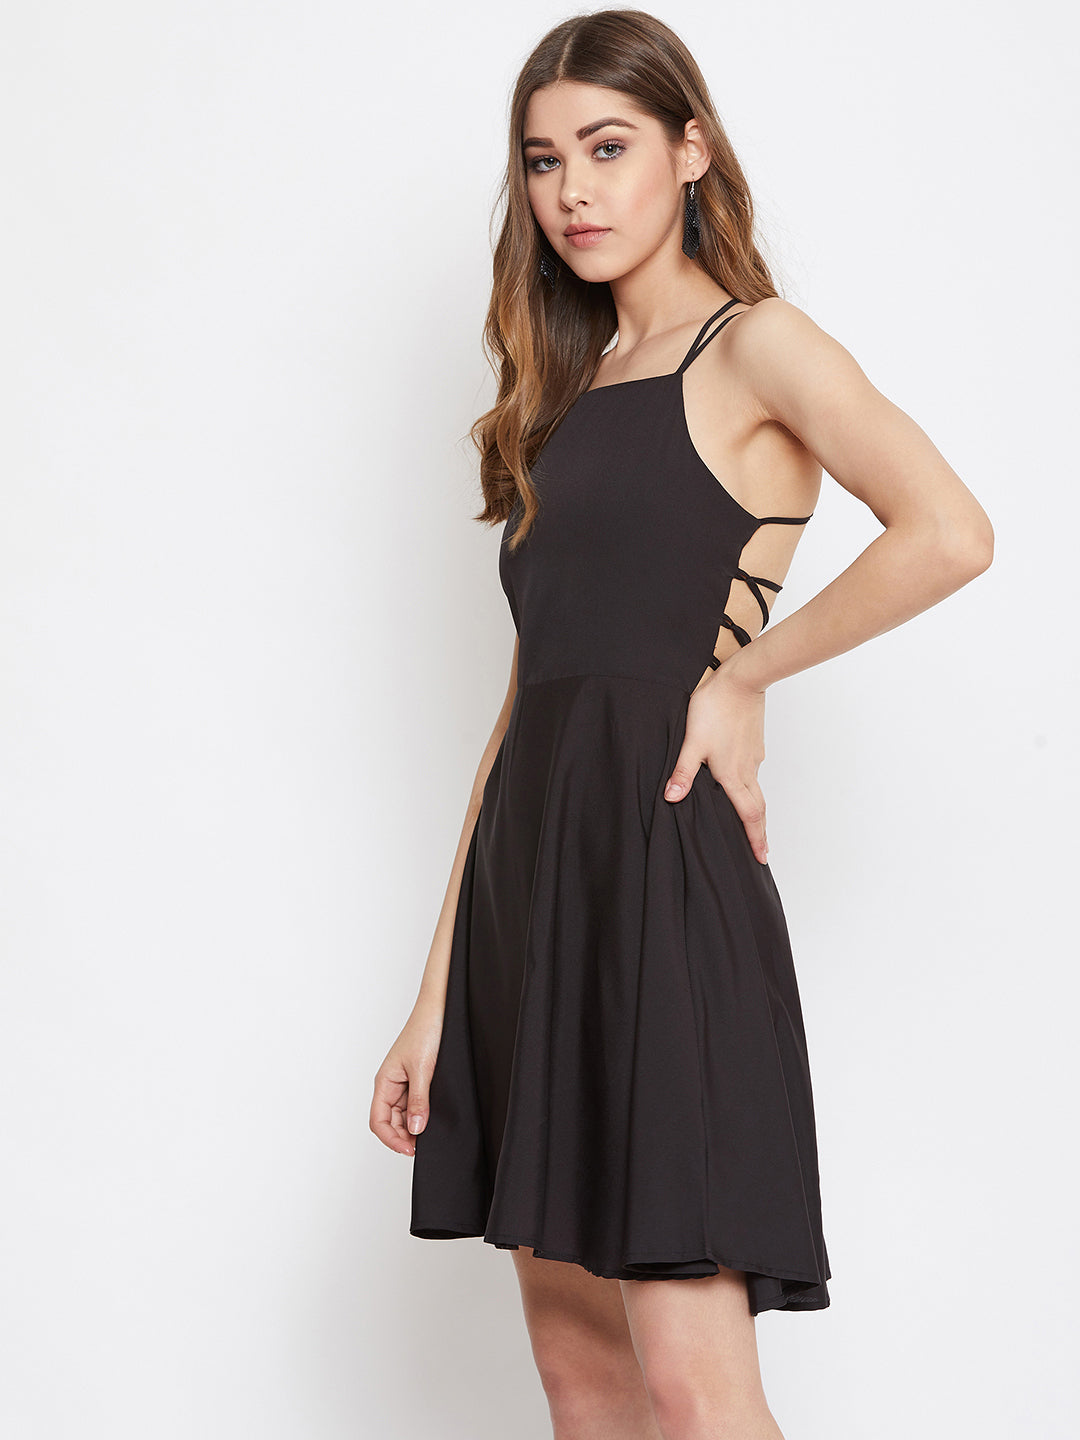 Berrylush Women Solid Black Caged Back Tie-Up Fit & Flare Mini Dress